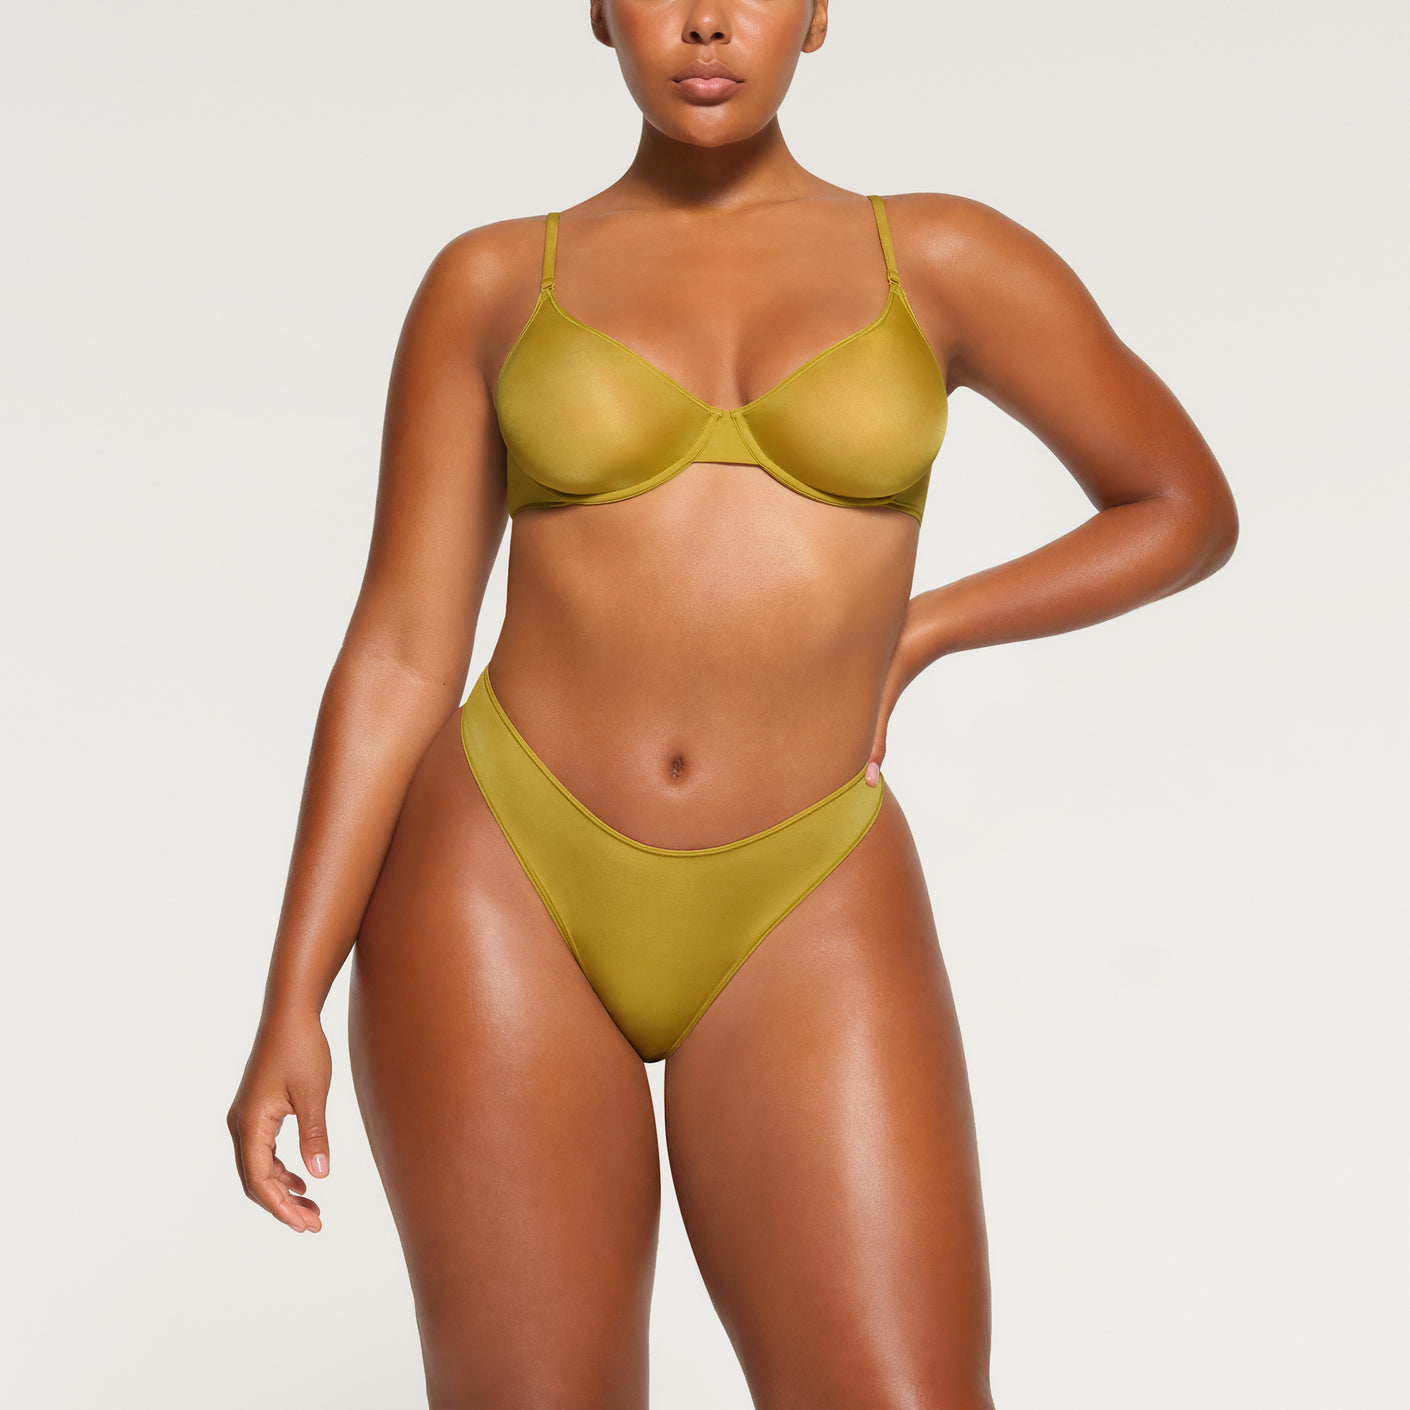 Track Jelly Sheer Unlined Scoop Bra - Chartreuse - 36 - F at Skims